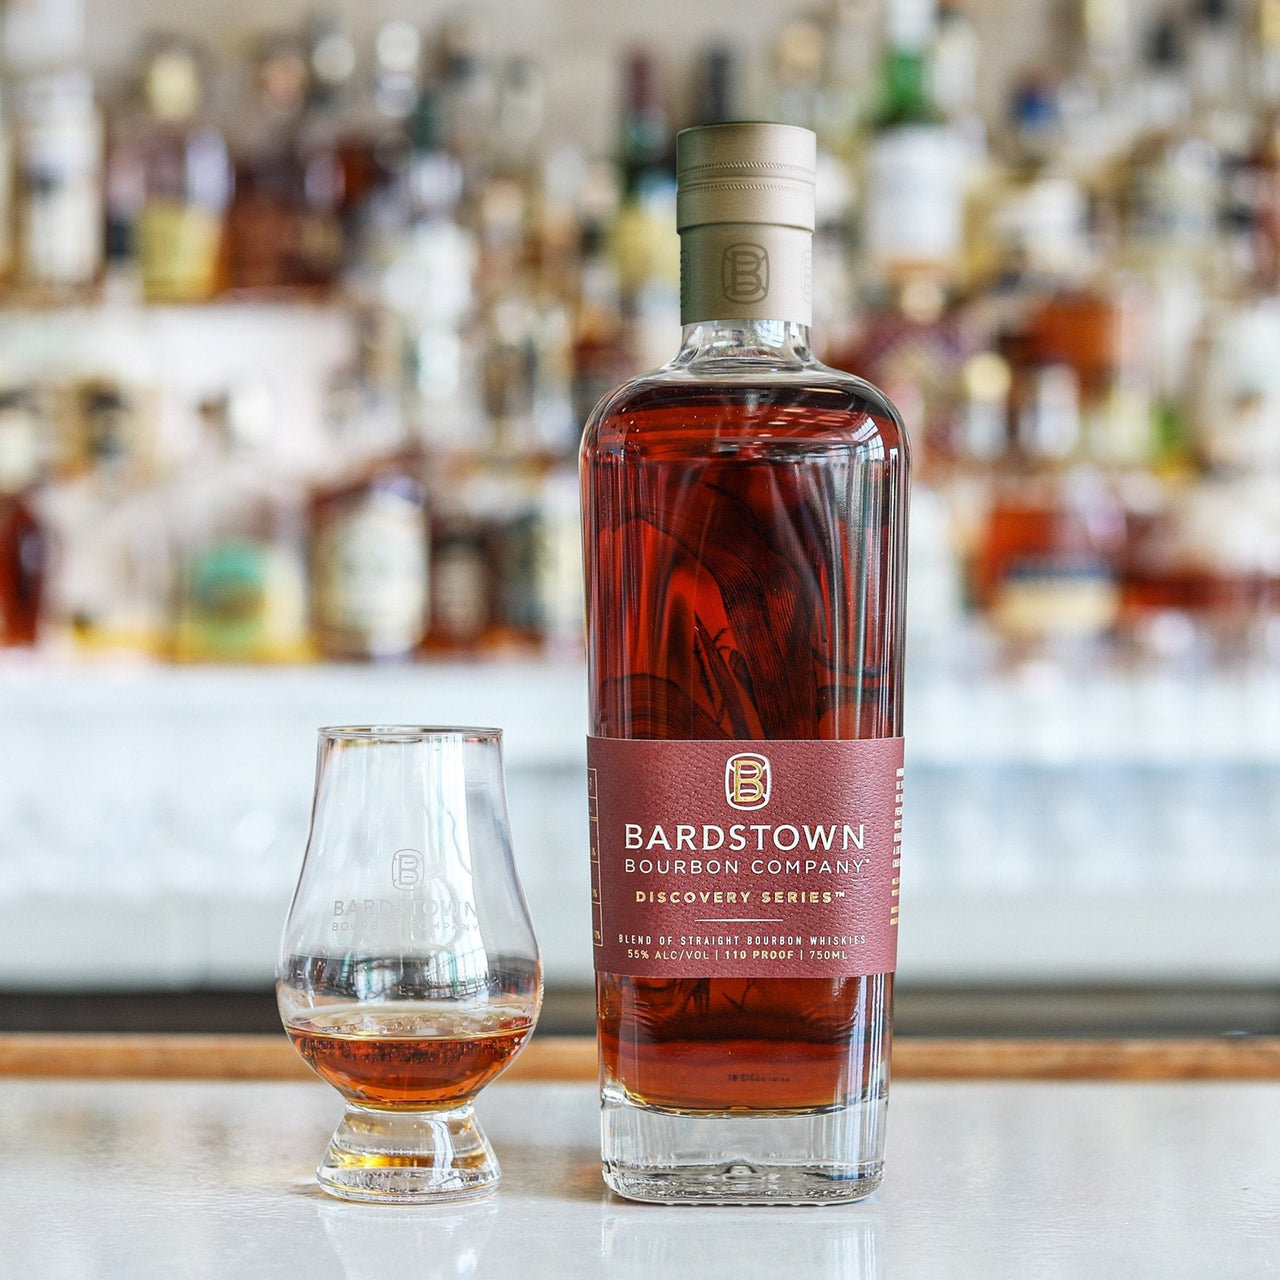 Bardstown Bourbon Company Discovery Series #4 Bourbon Bardstown Bourbon Company   